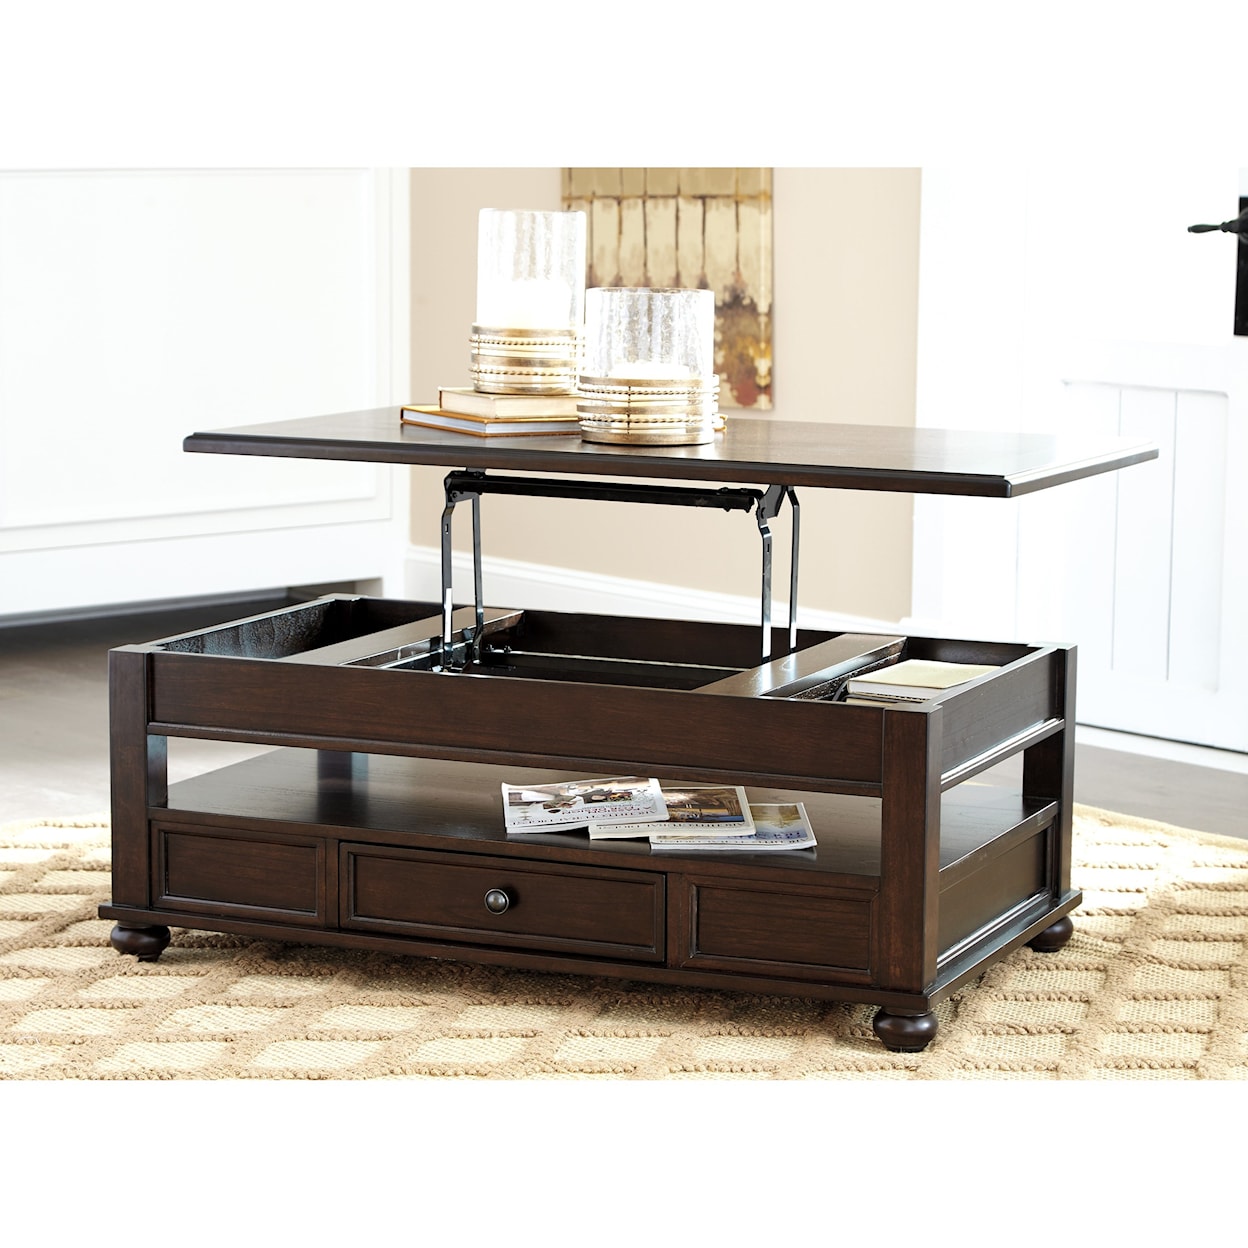 Signature Design by Ashley Furniture Barilanni Lift Top Cocktail Table